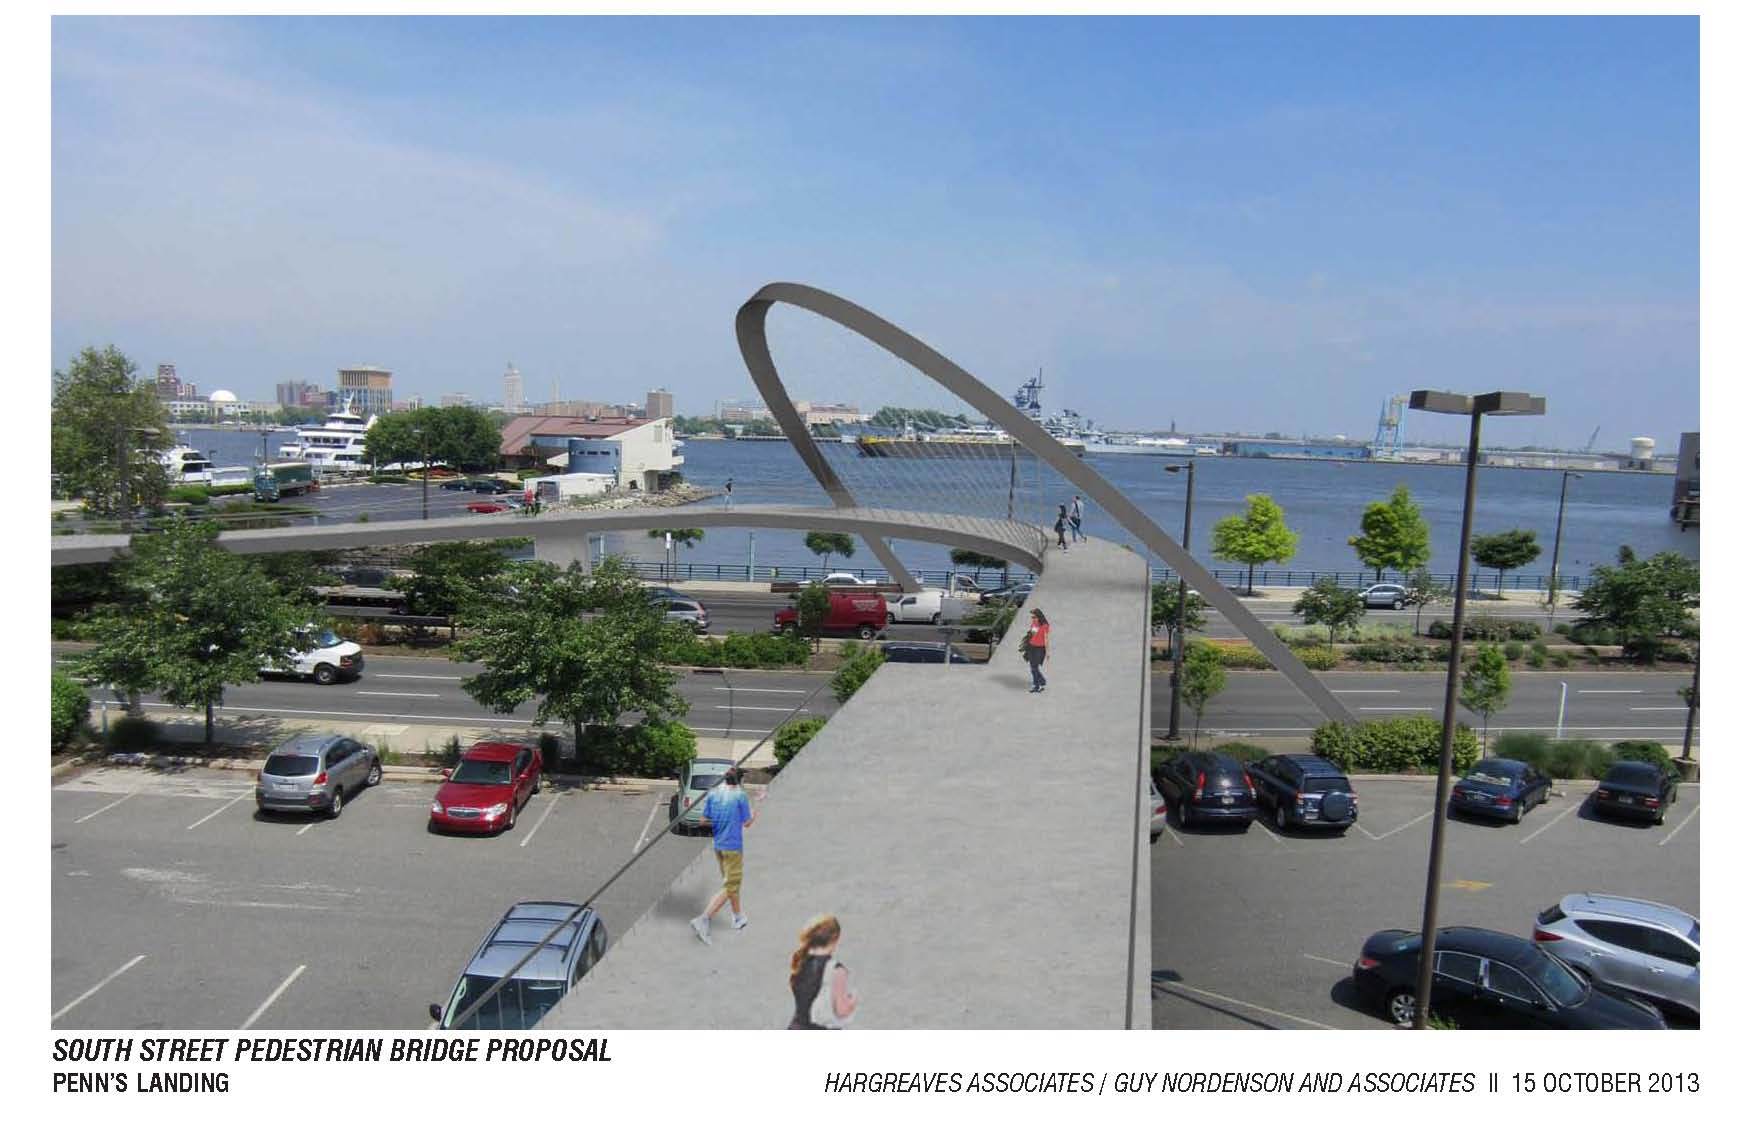 By Hargreaves Associates, image courtesy Delaware River Waterfront Corporation.